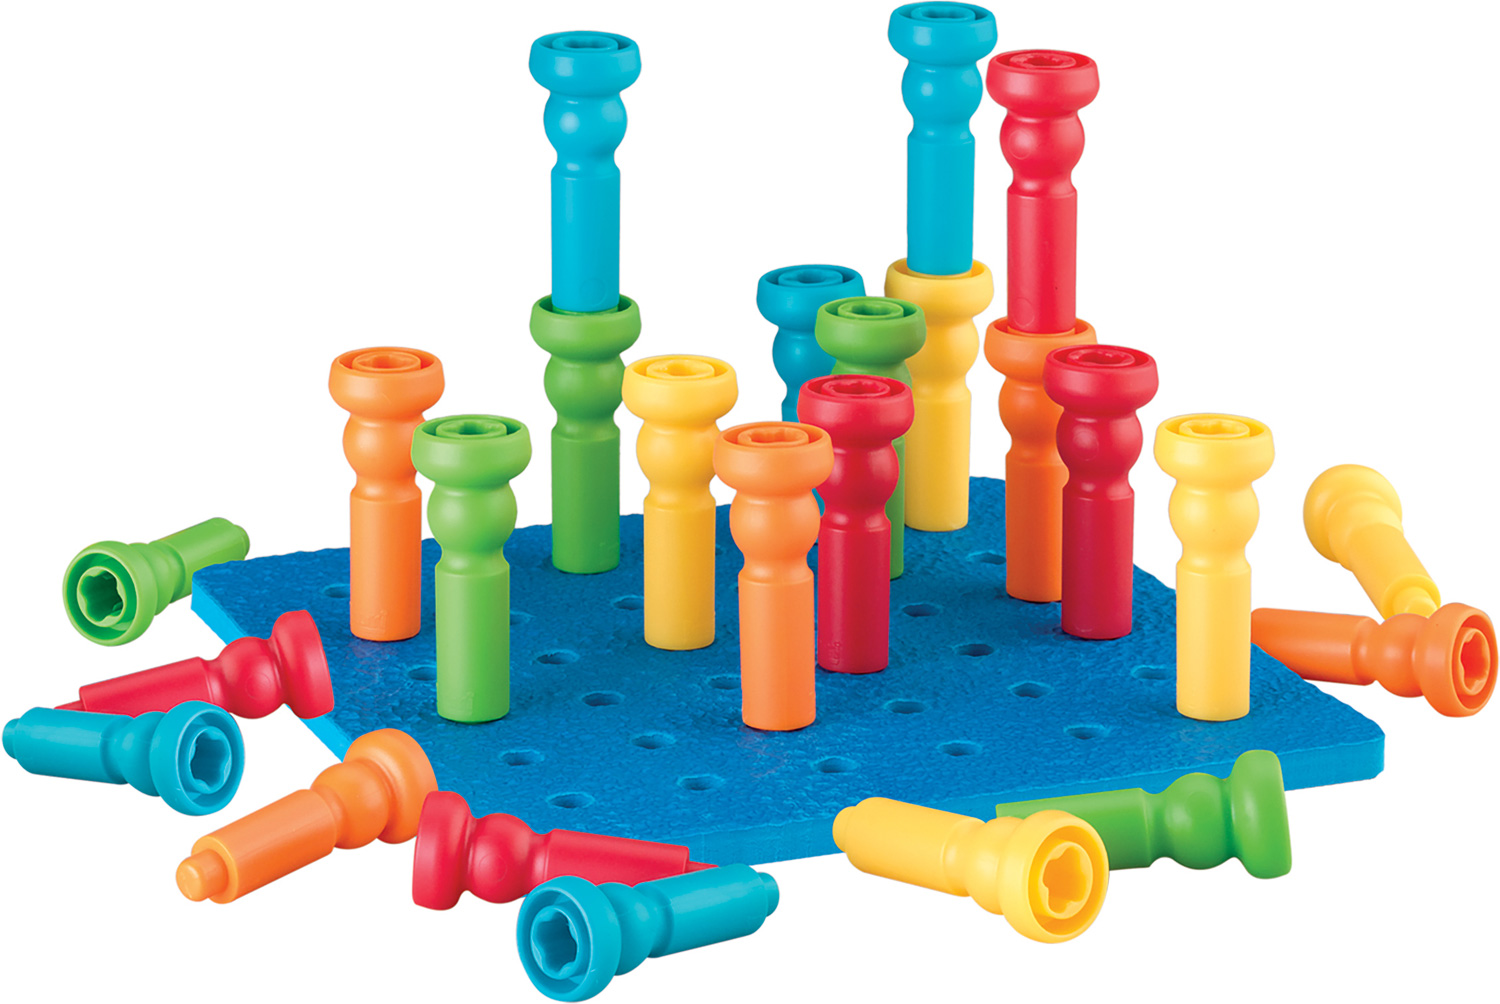 Tall-Stacker Peg & Pegboard Set - Tom's Toys